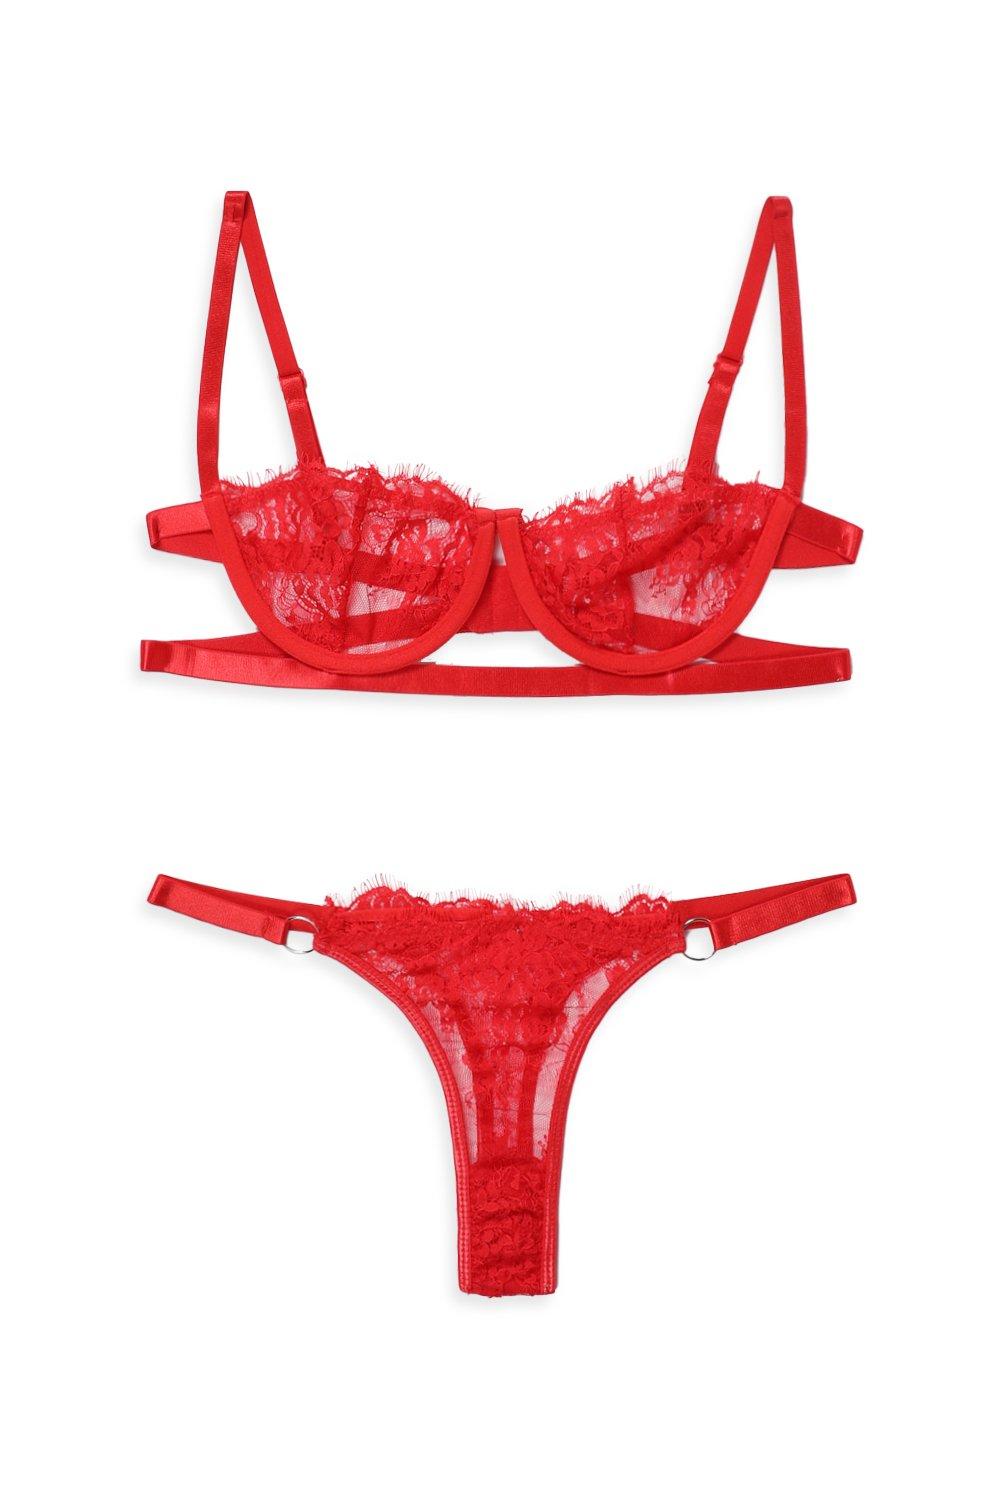 https://media.boohoo.com/i/boohoo/lzz88505_red_xl_4/female-red-strapping-underwire-bra-and-thong-set